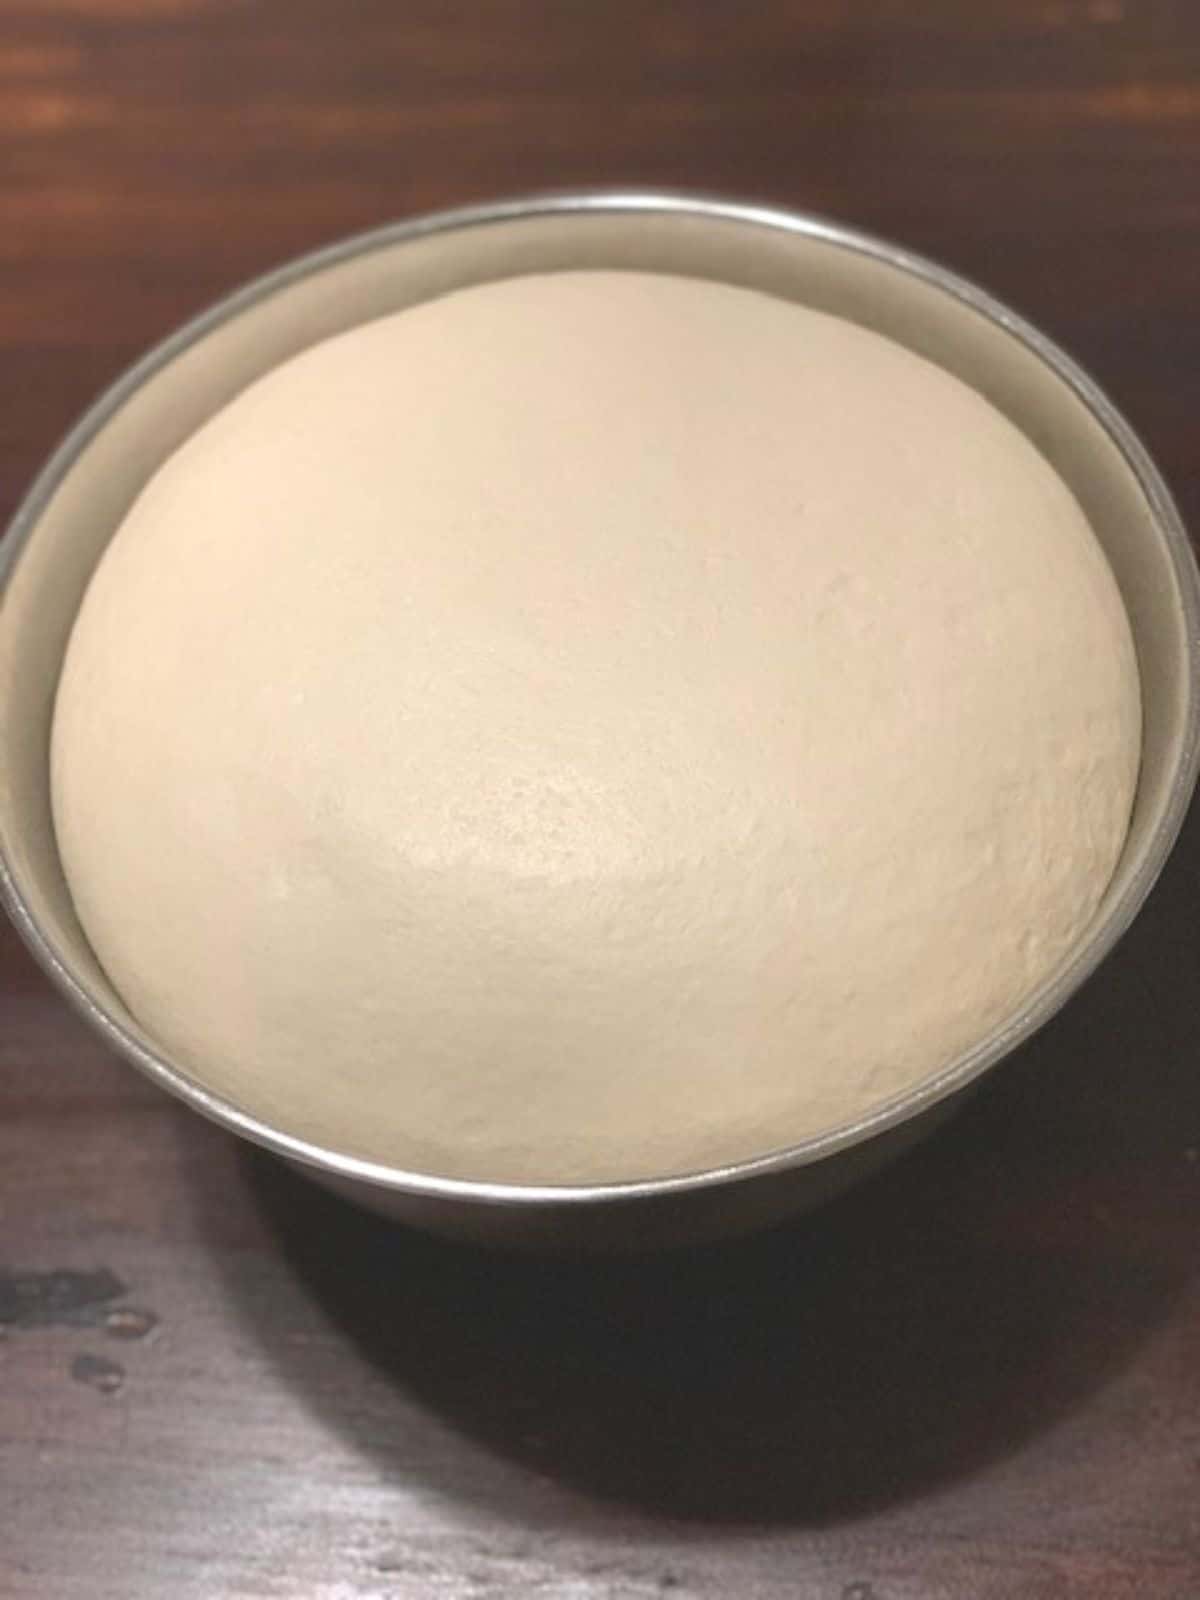 Risen bread dough in stainless steel bowl on a dark wooden tabletop